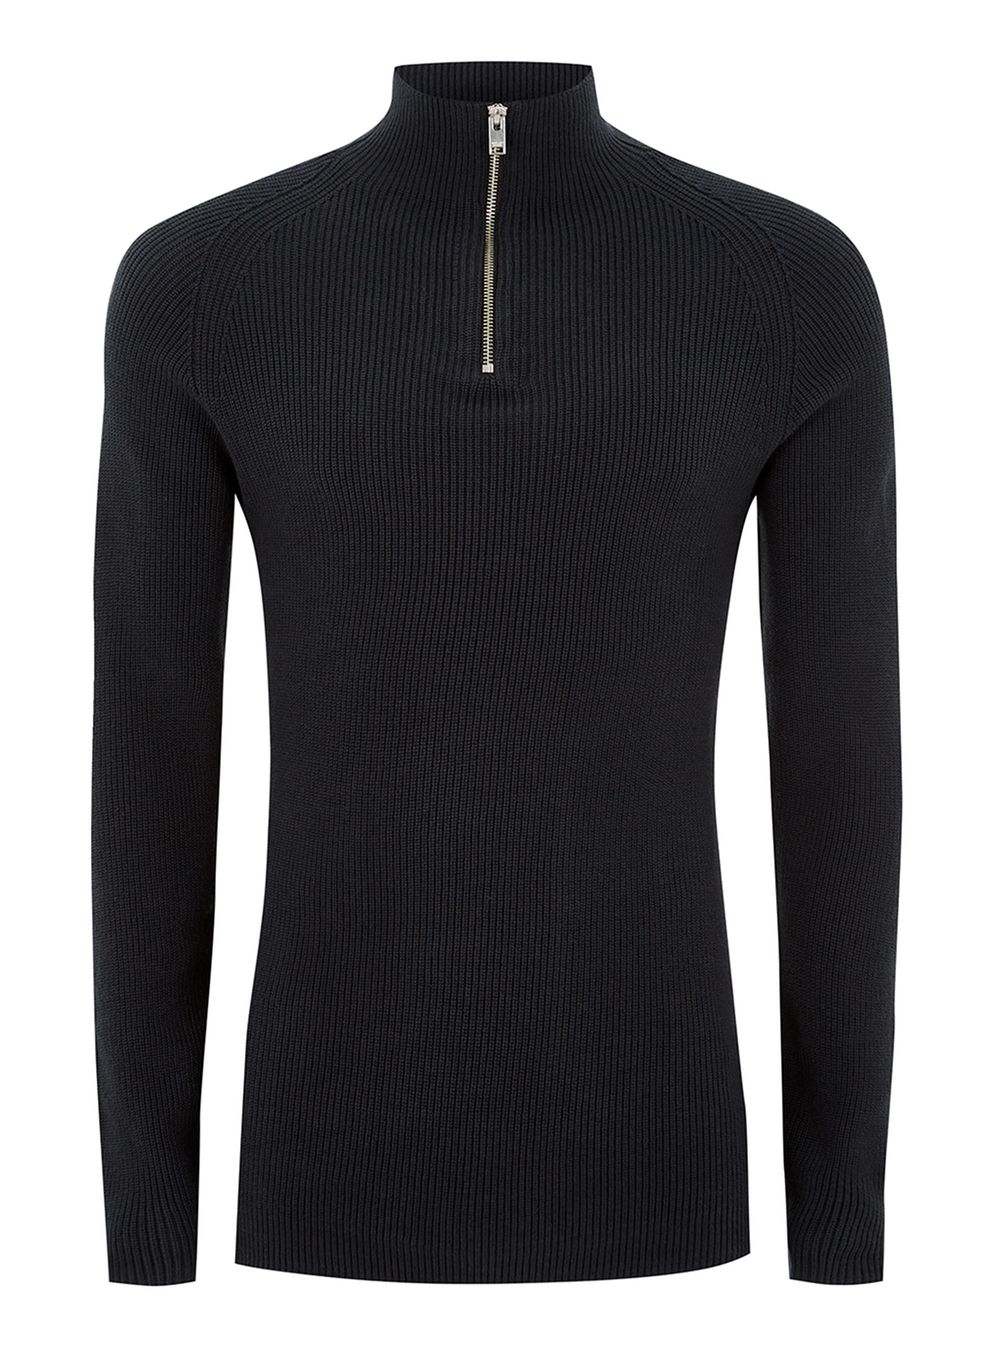 Selected Homme Tall Navy Knitted Top £36 